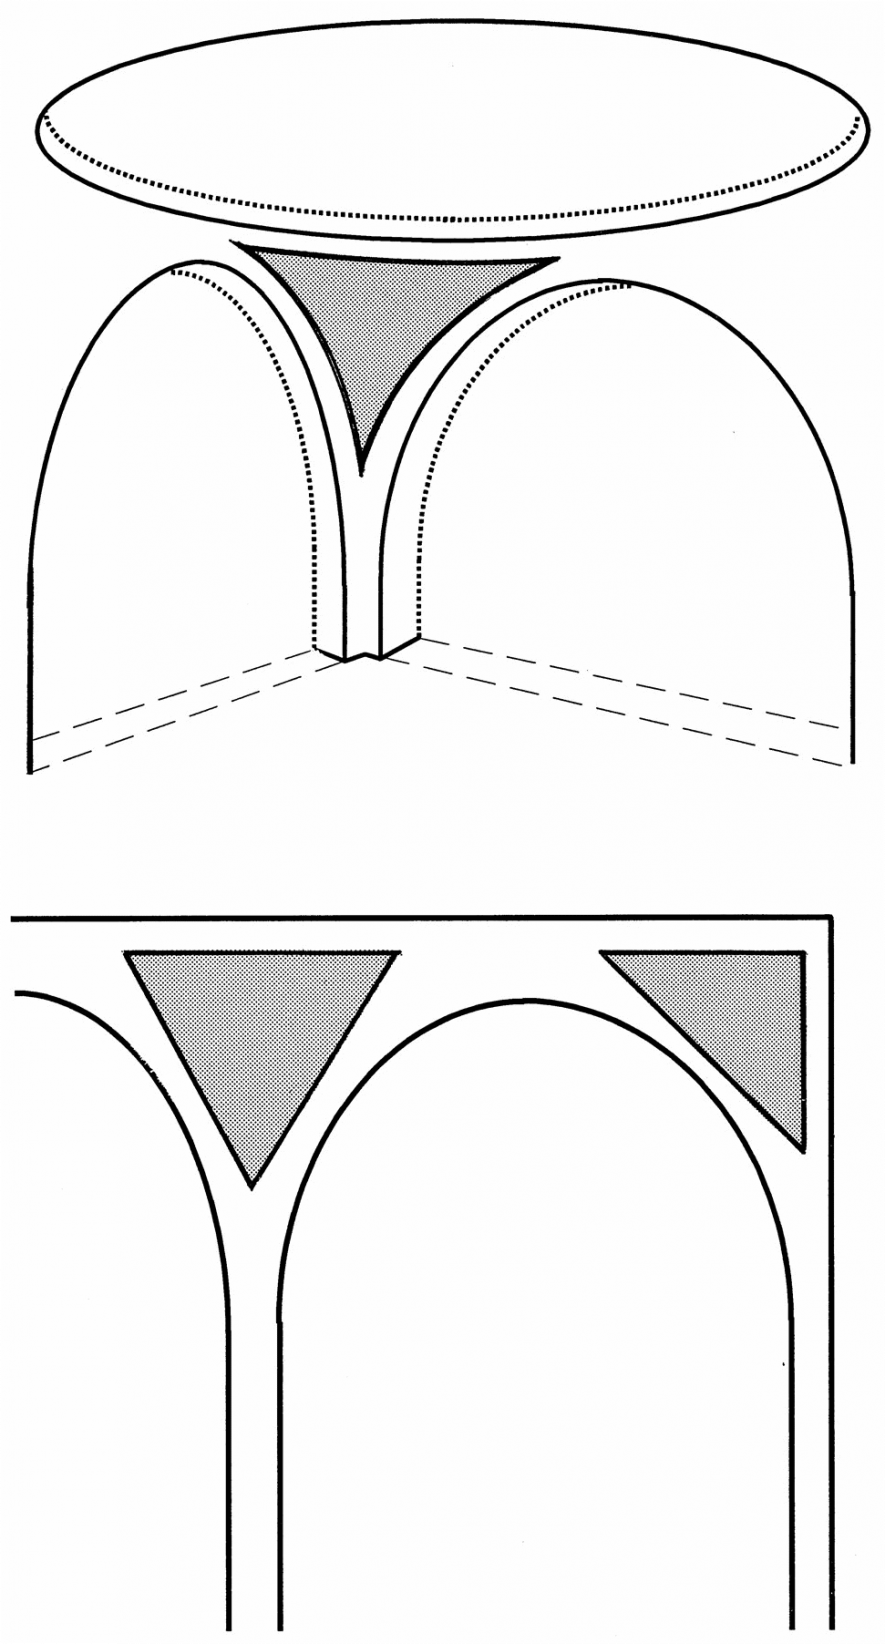 Image caption: Dome, Arch and Spandrels